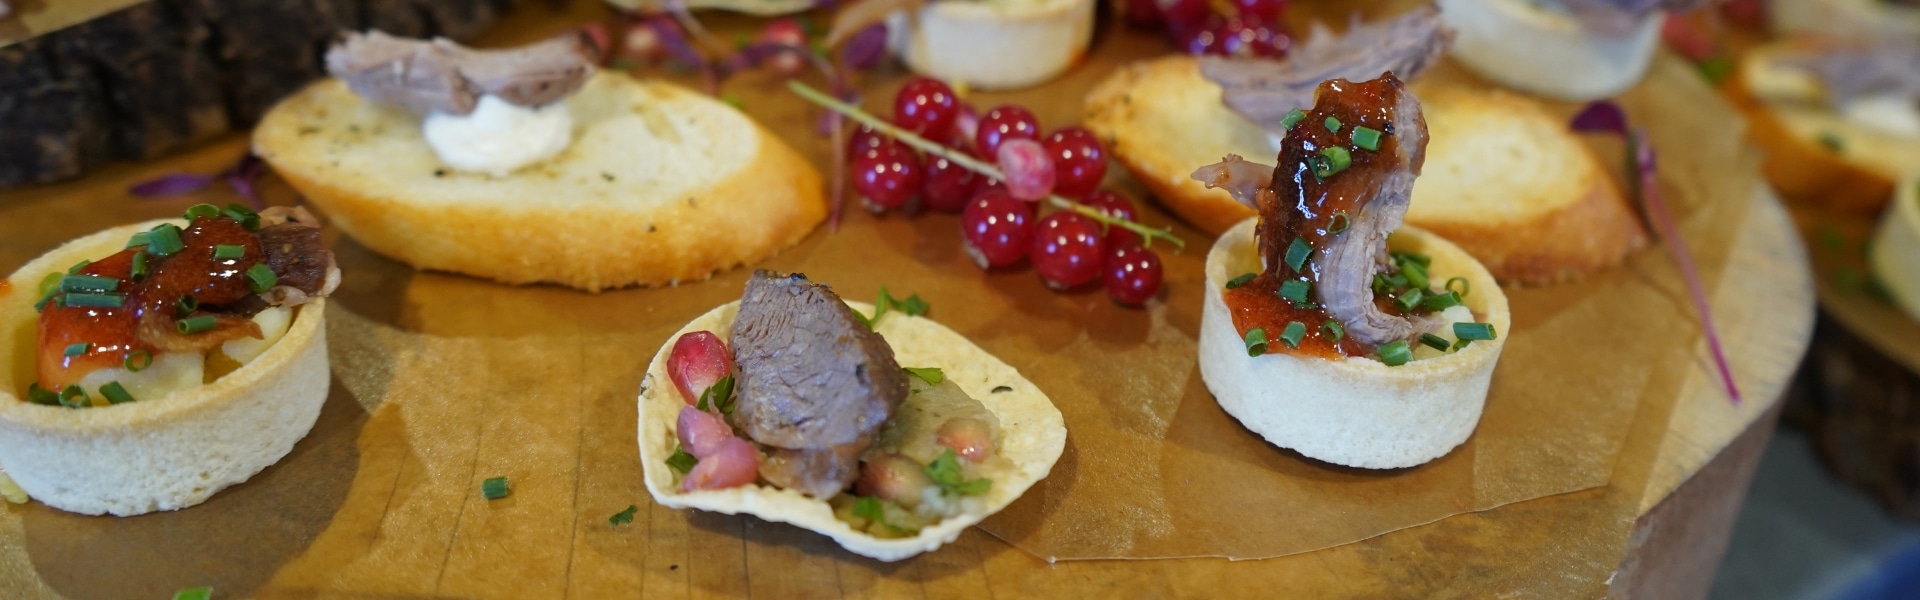 Venison canapes made by Queen's College students